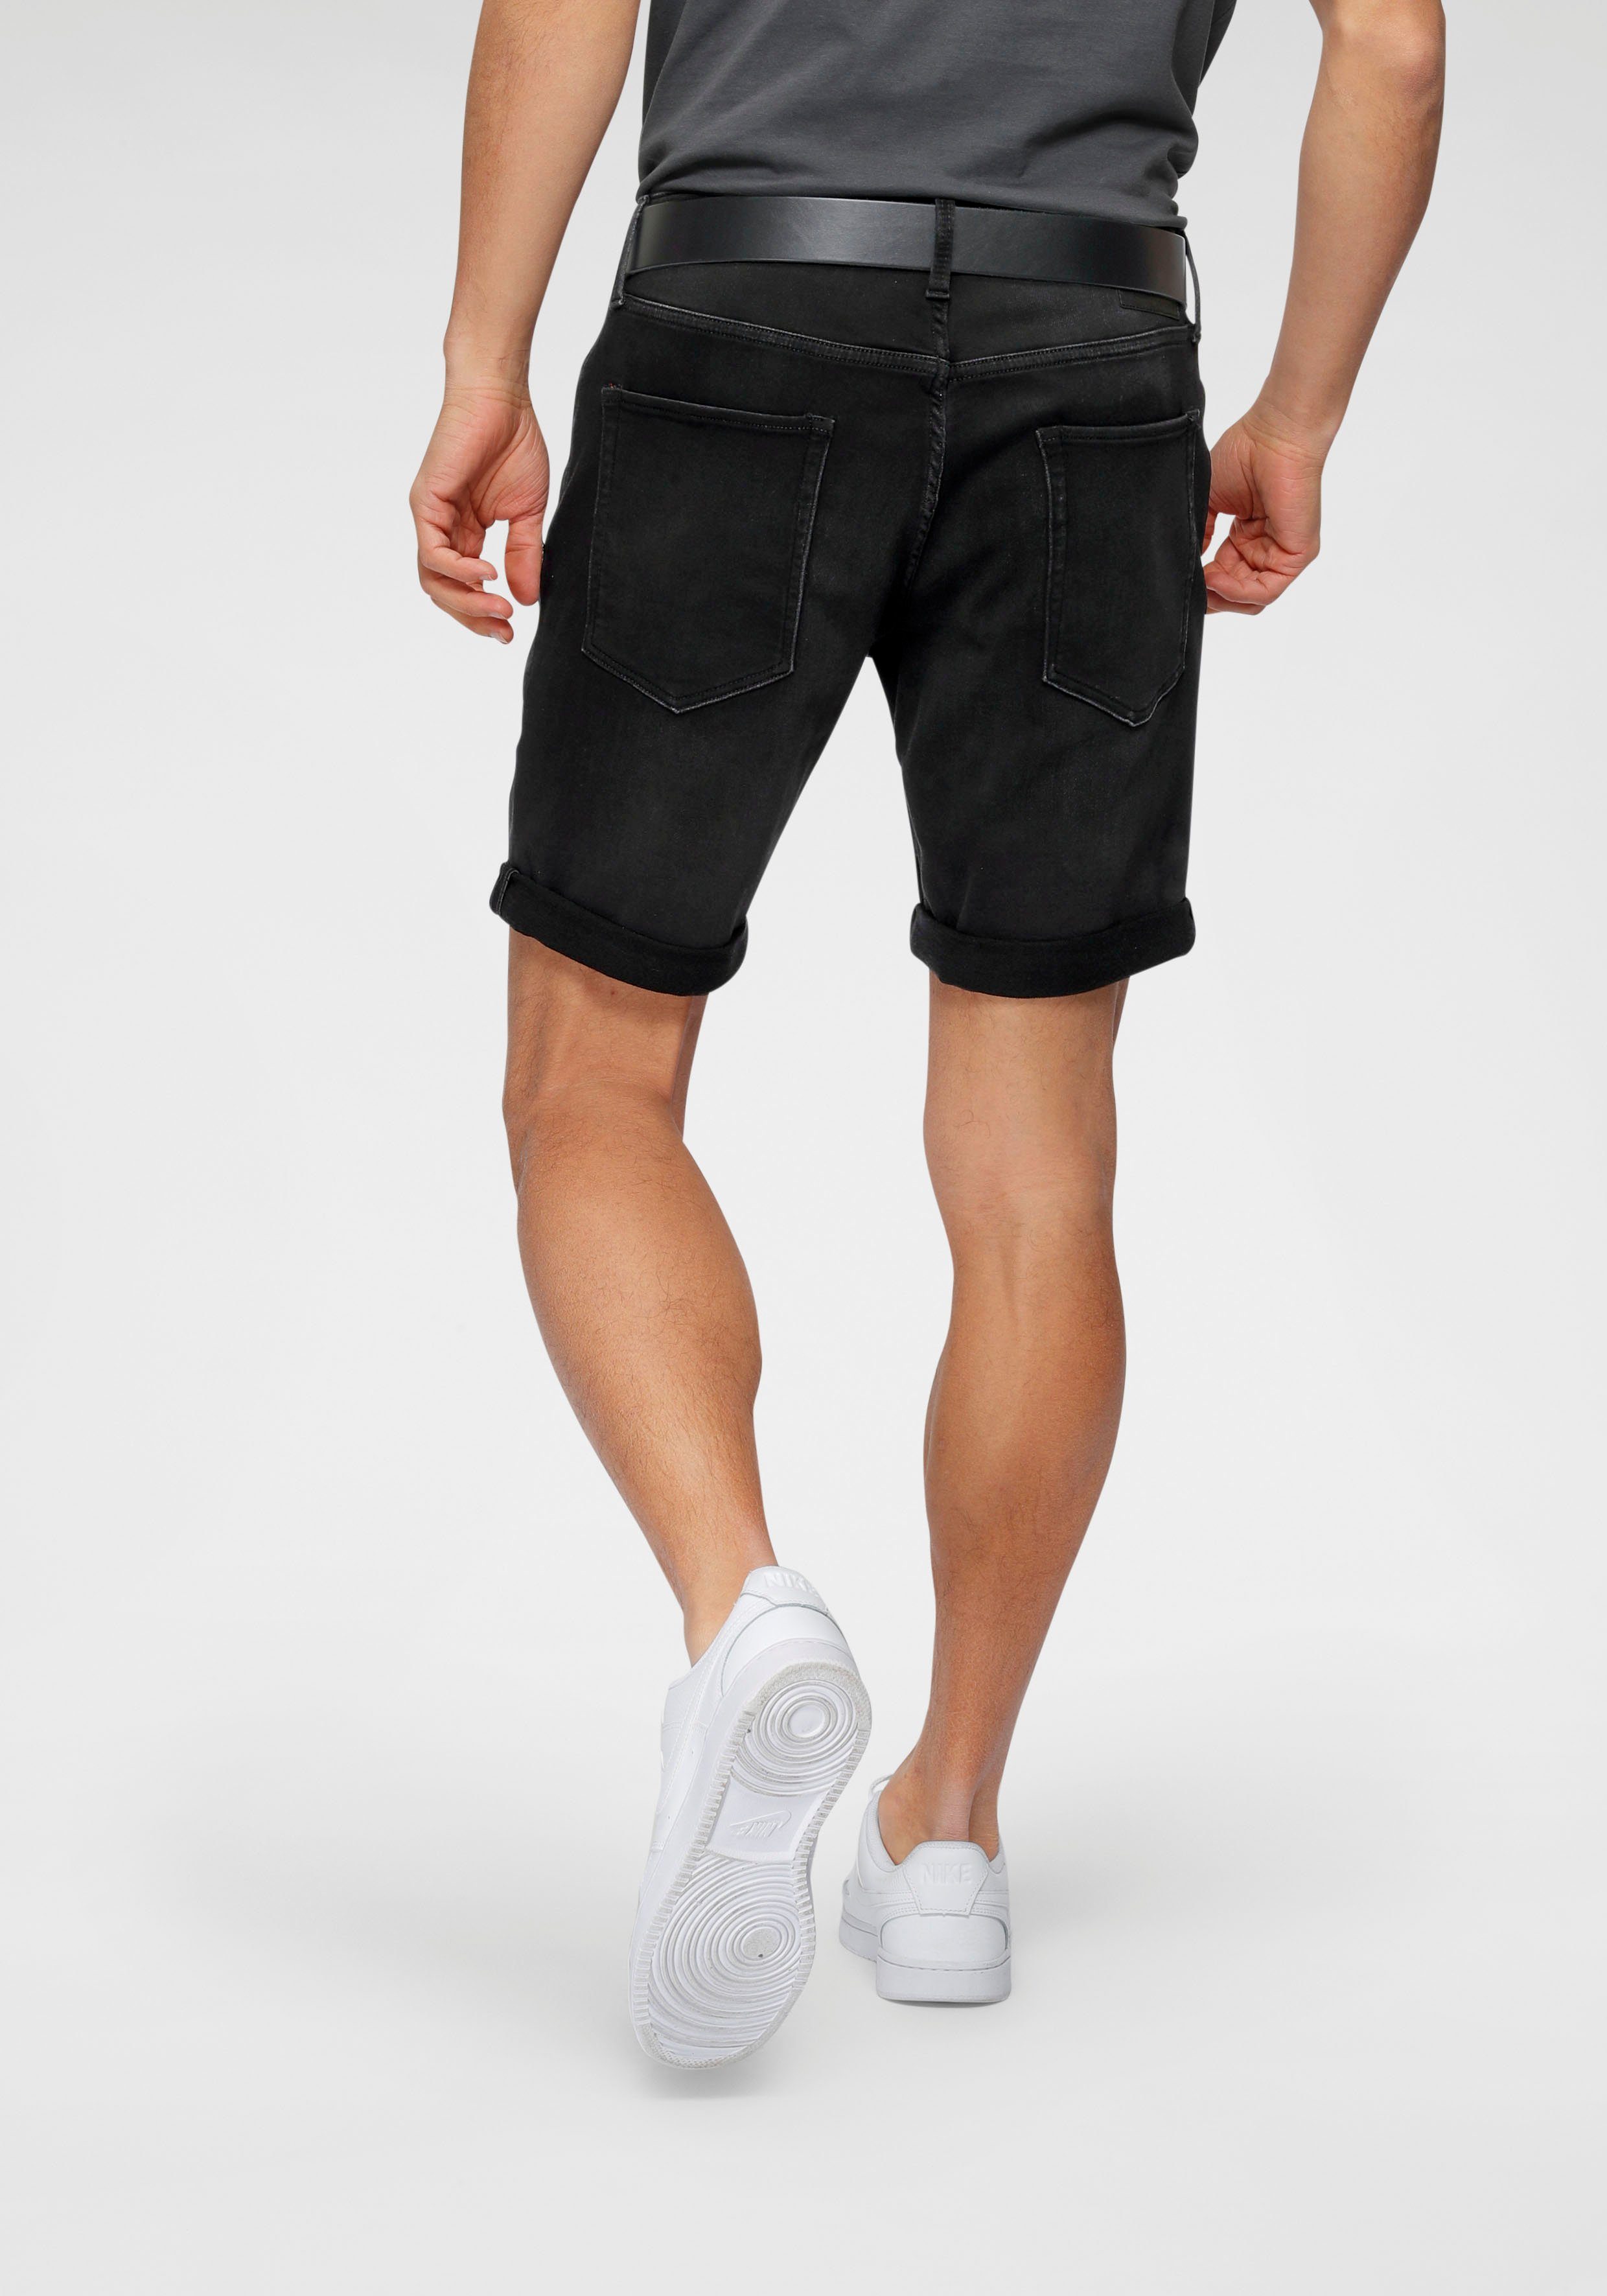 DNM BLUE & NOOS Jeansshorts LIGHT 5189 ONLY SONS schwarz SHORTS ONSPLY